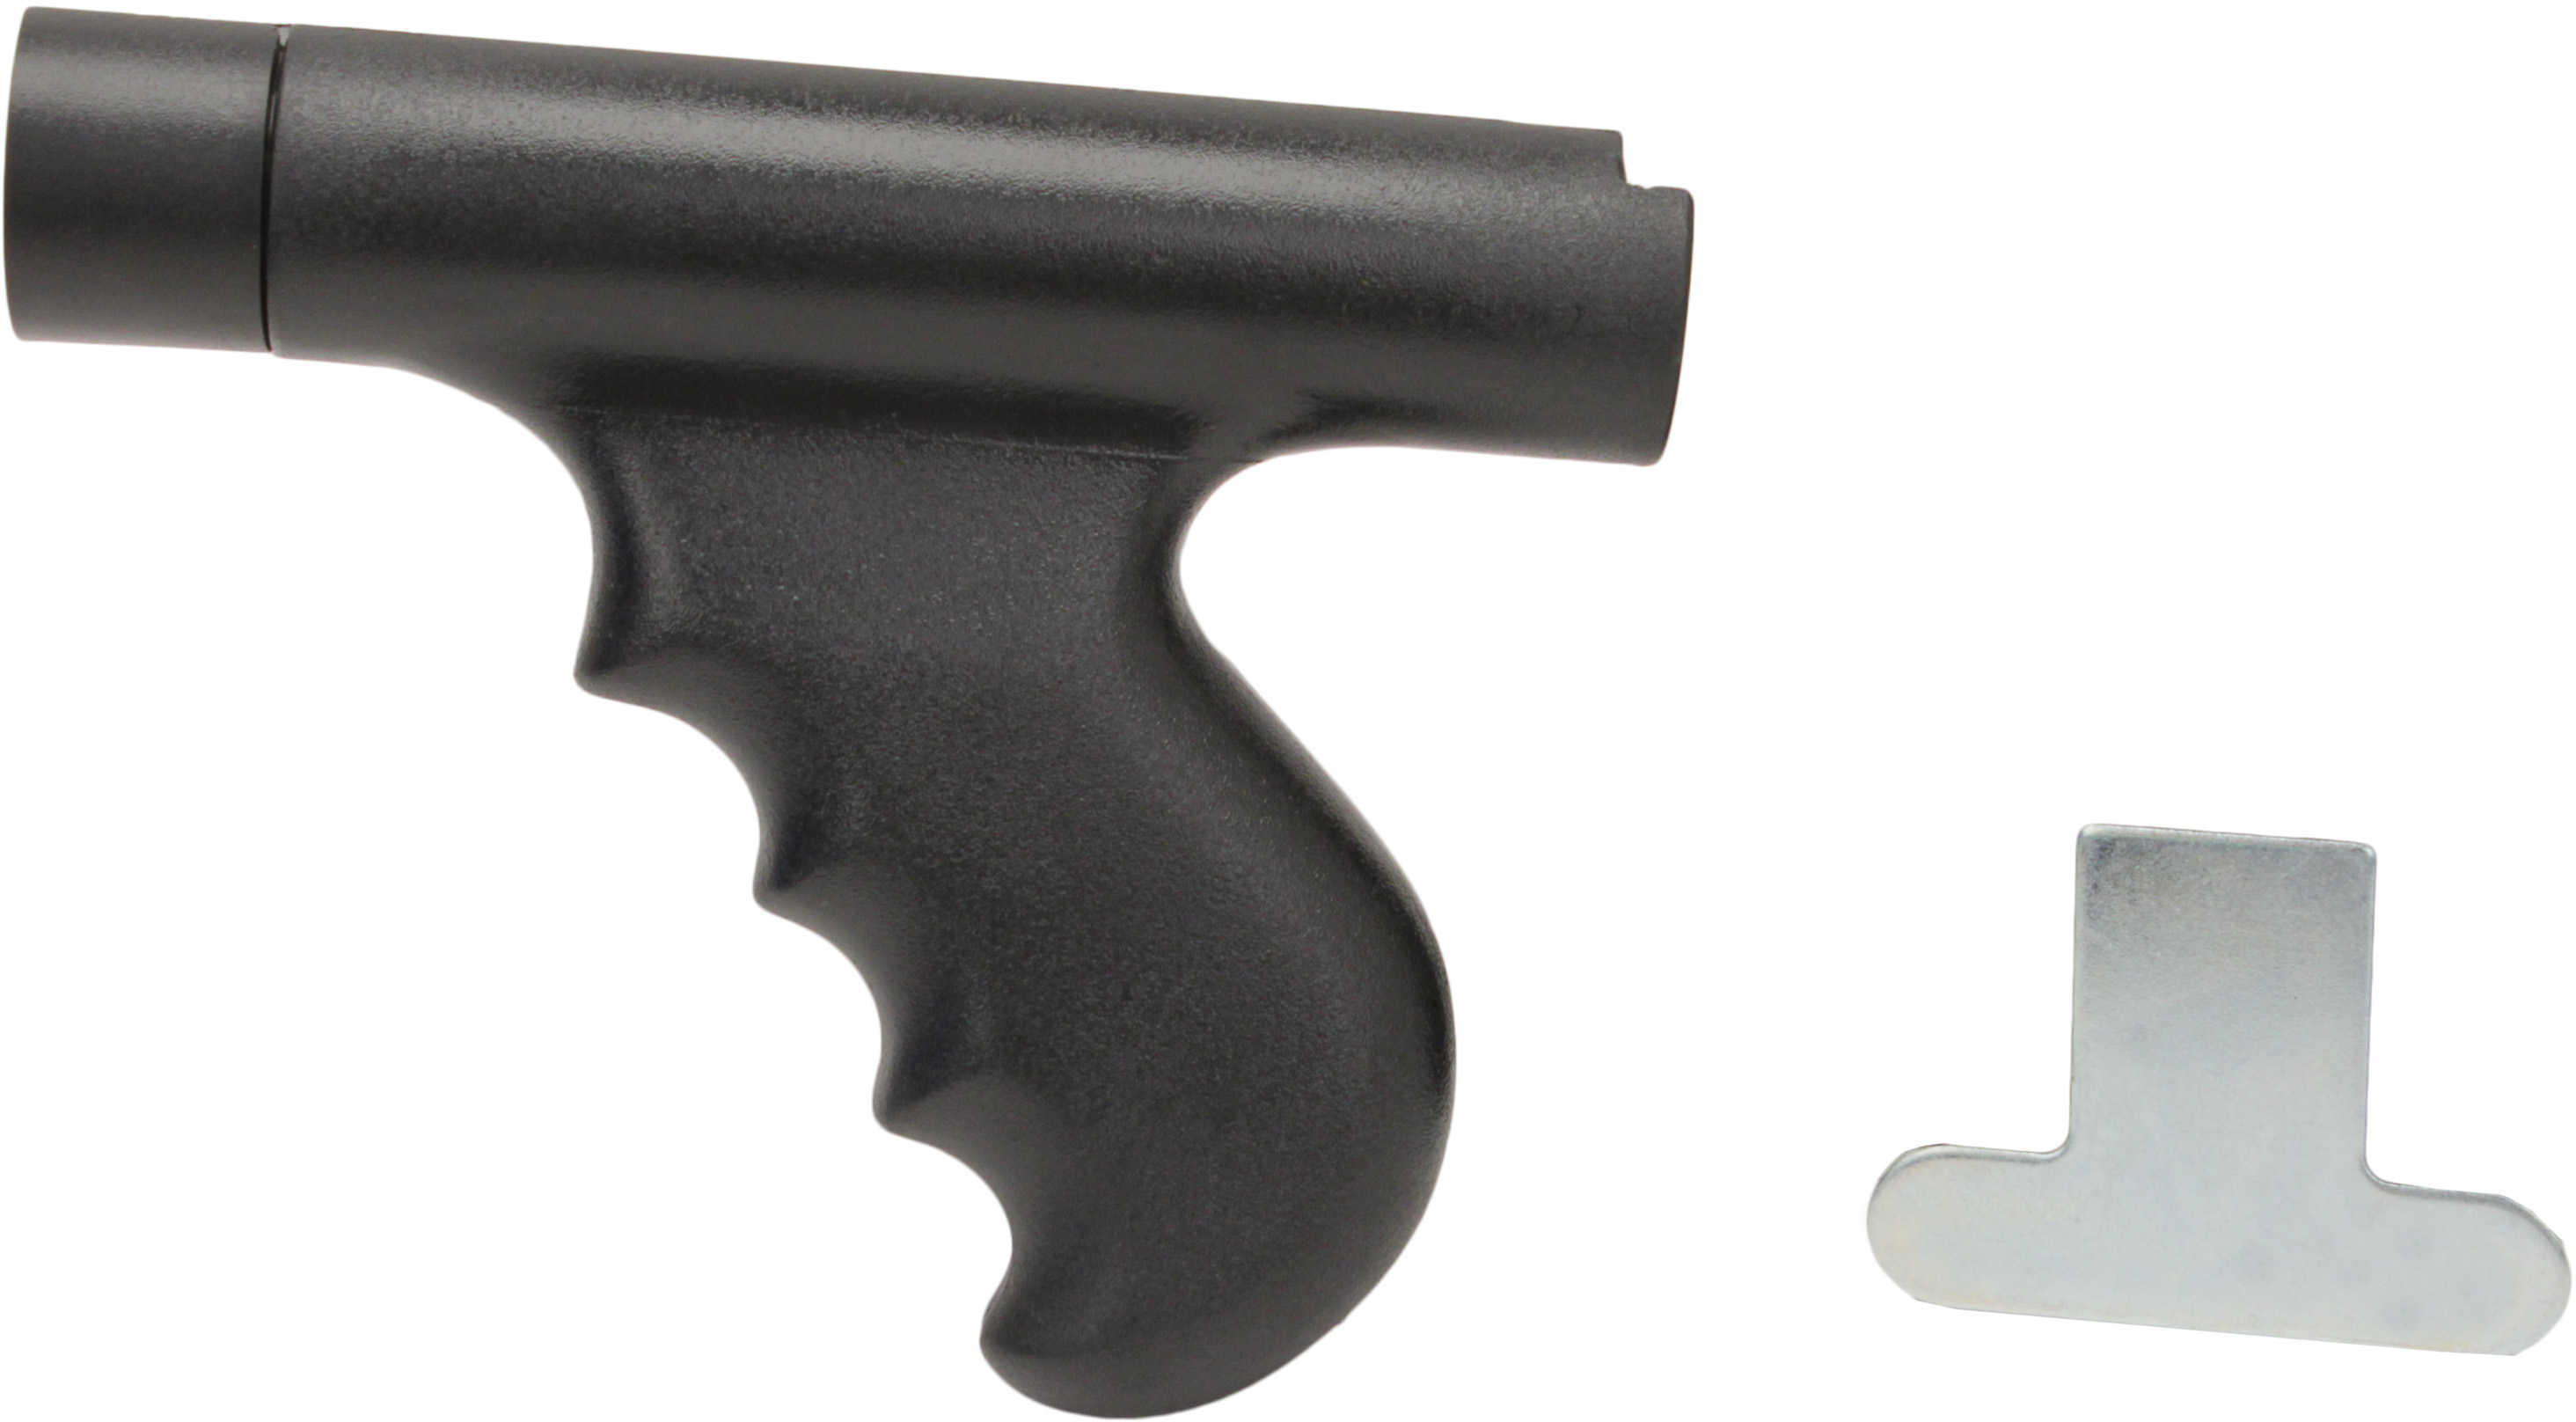 Pachmayr TacStar Front Shotgun Grip For Mossberg 500/590 Md: 1081151